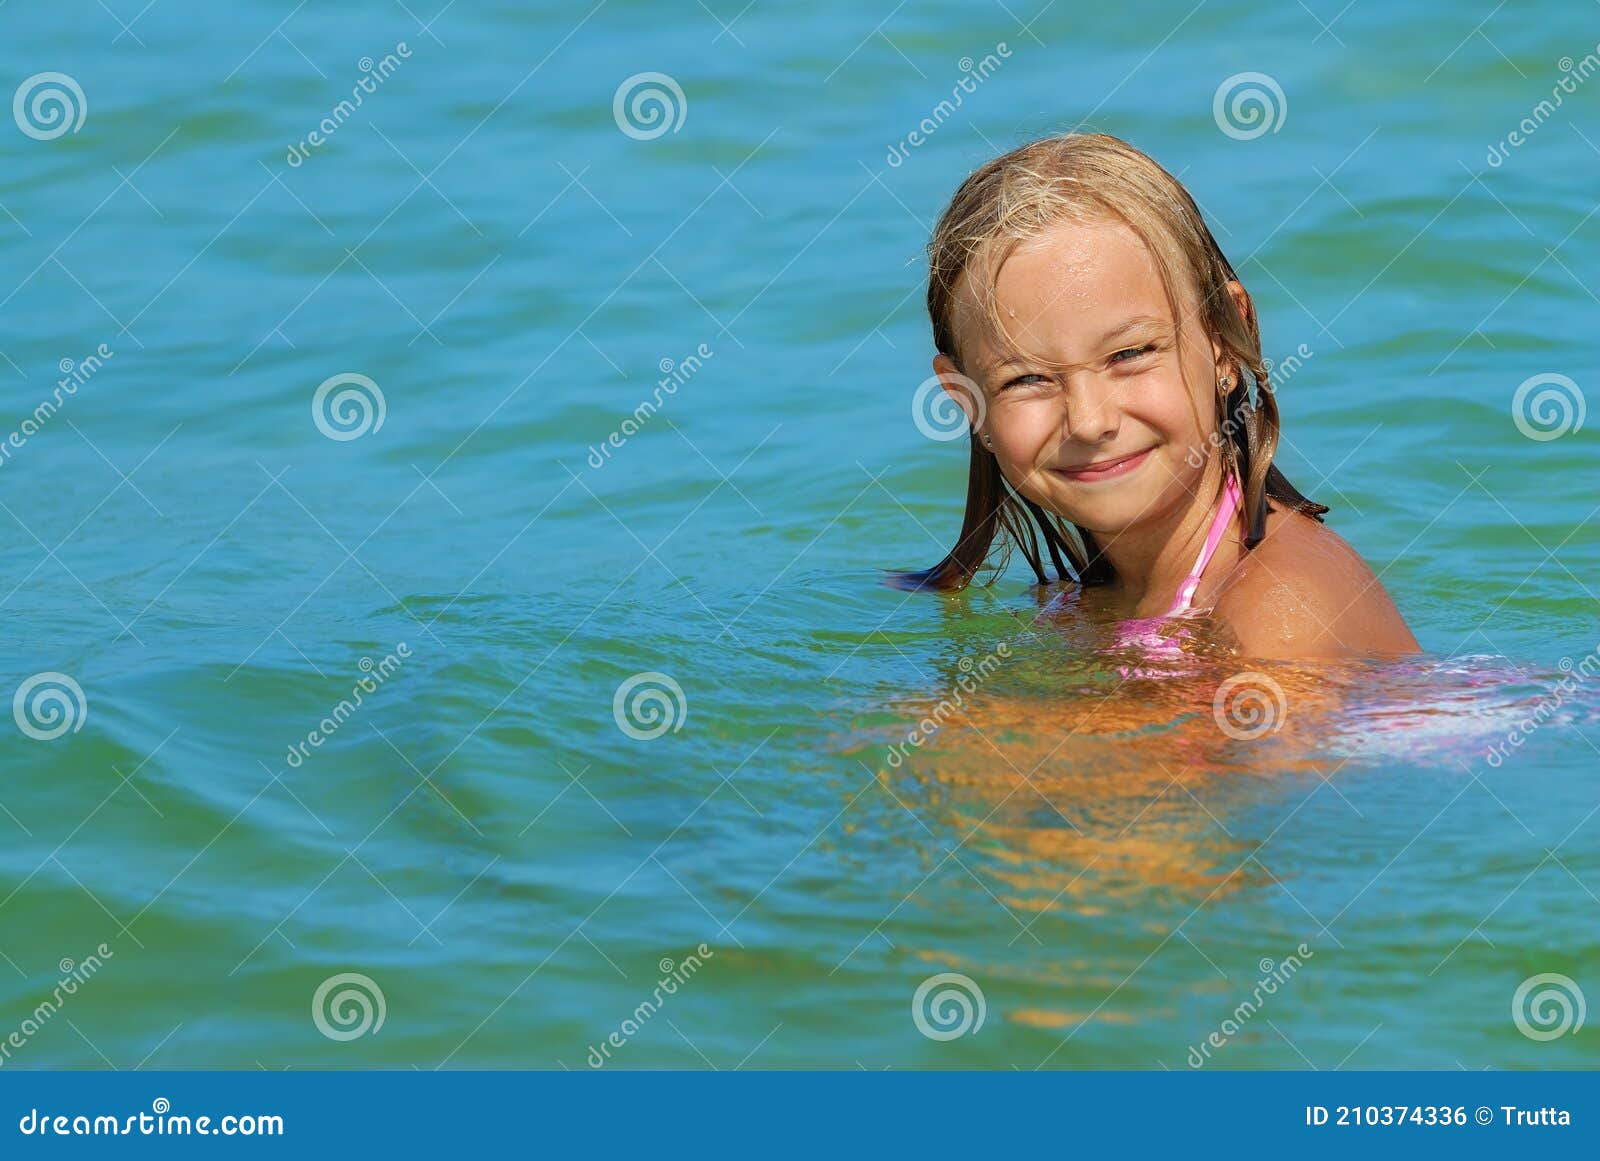 Cute Girl Playing in the Sea Stock Photo - Image of blue, playing ...